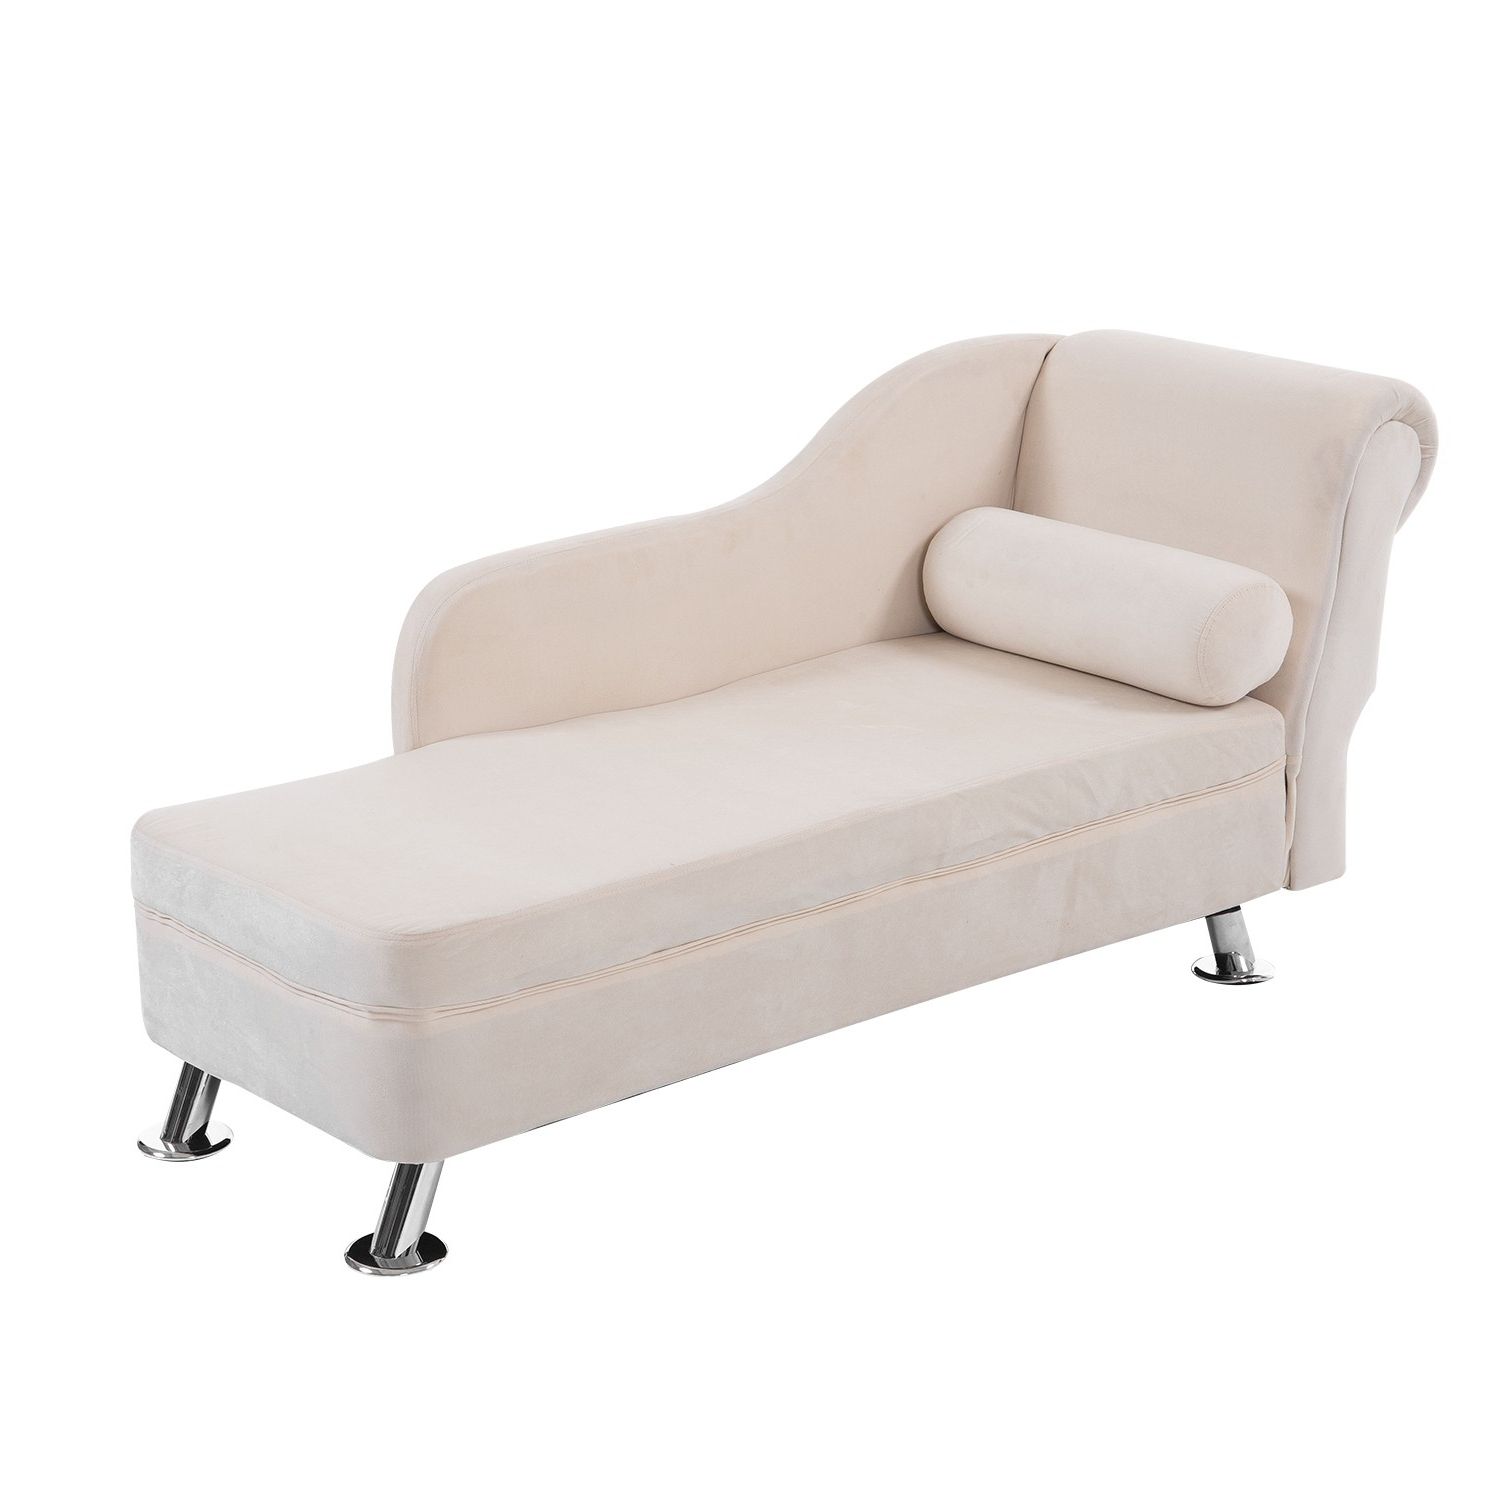 Most Current Cream Chaise Lounges With Homcom 62" Plush Chaise Lounge Chair – Cream White – Clearance (View 4 of 15)